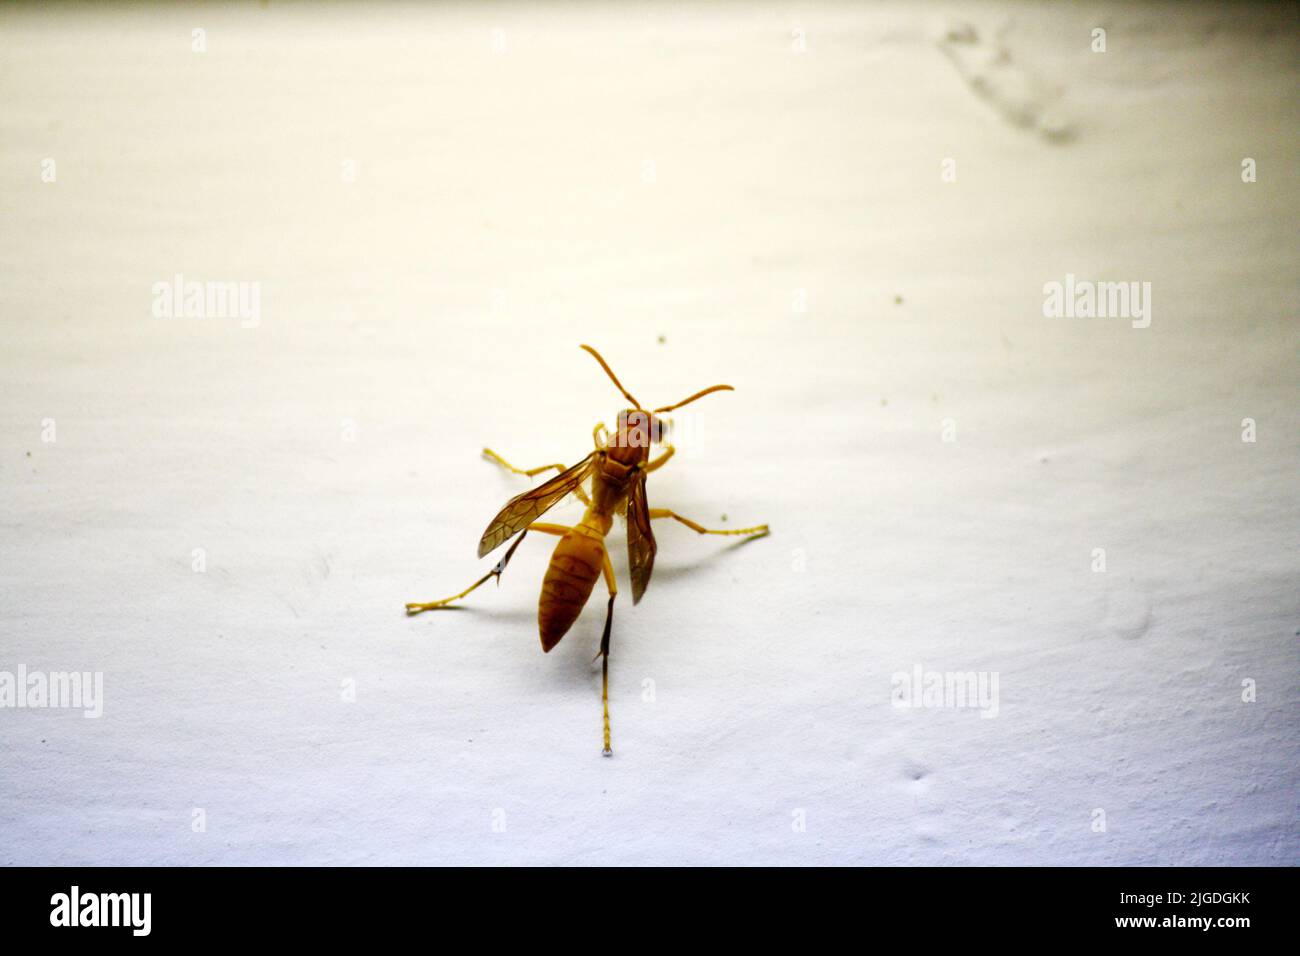 An Indian Yellow Paper Wasp (Polistes olivaceus) on a window pane : (pix SShukla) Stock Photo